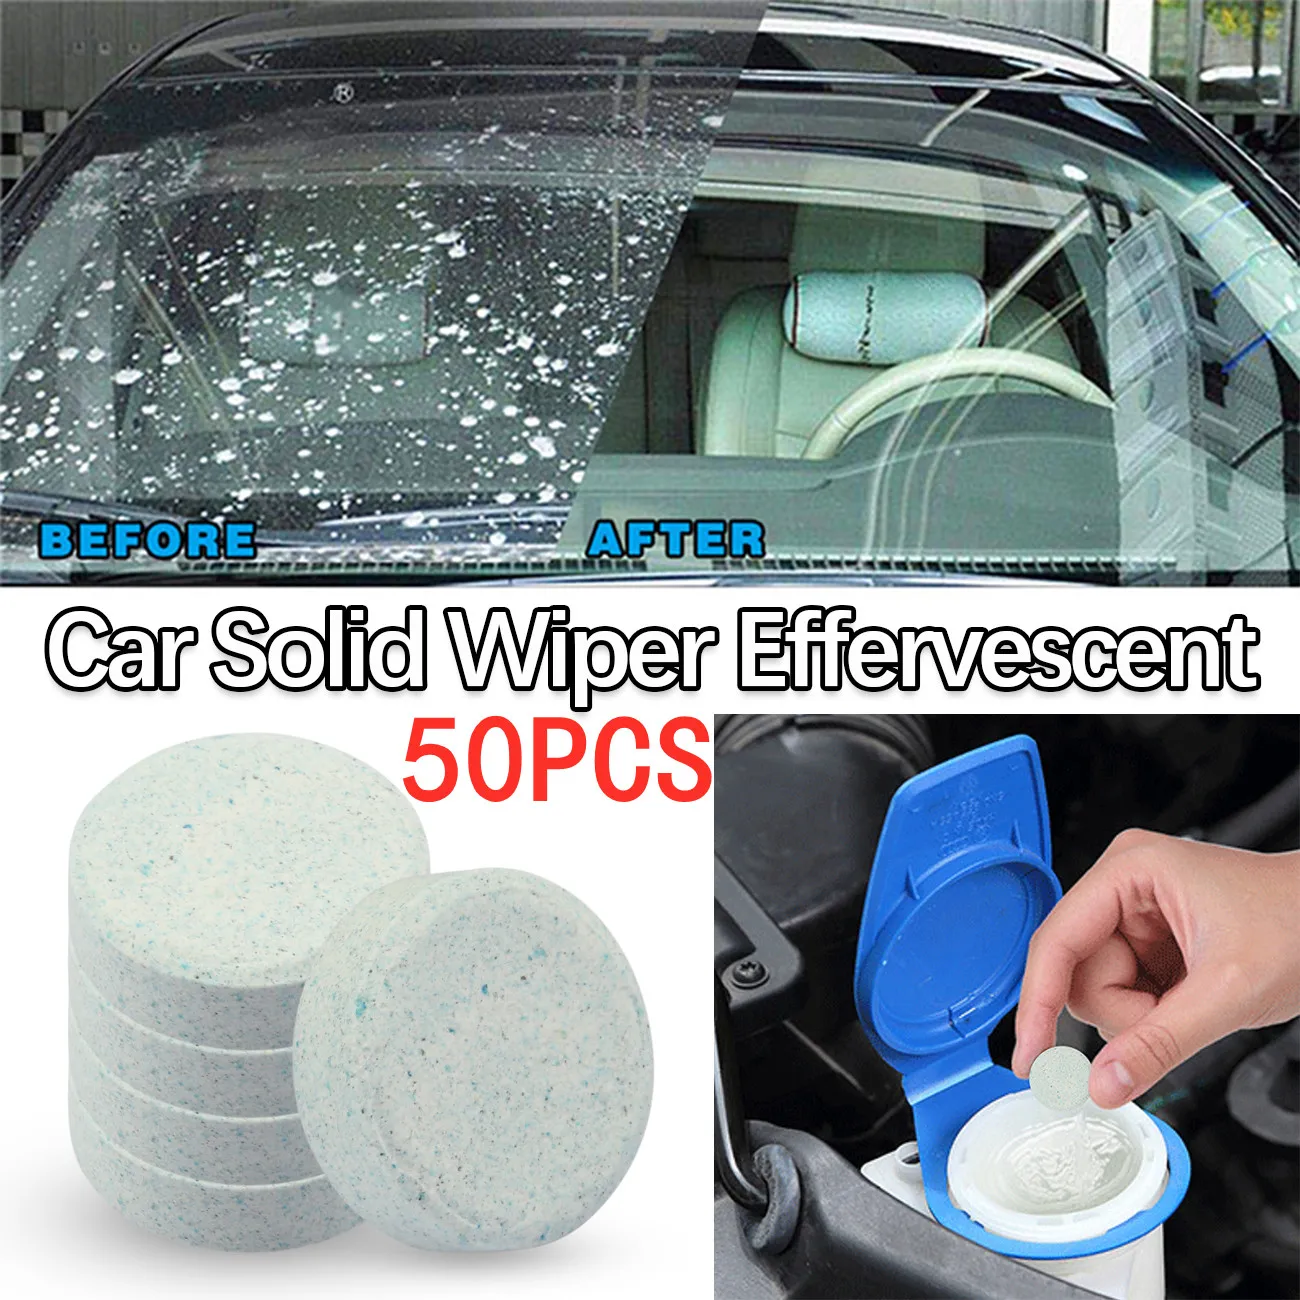 

50PCS Car Detergent Effervescent Tablets Washer (1PCS=4L Water) Car Windshield Wiper Glass Washer Auto Home Windows Cleaner